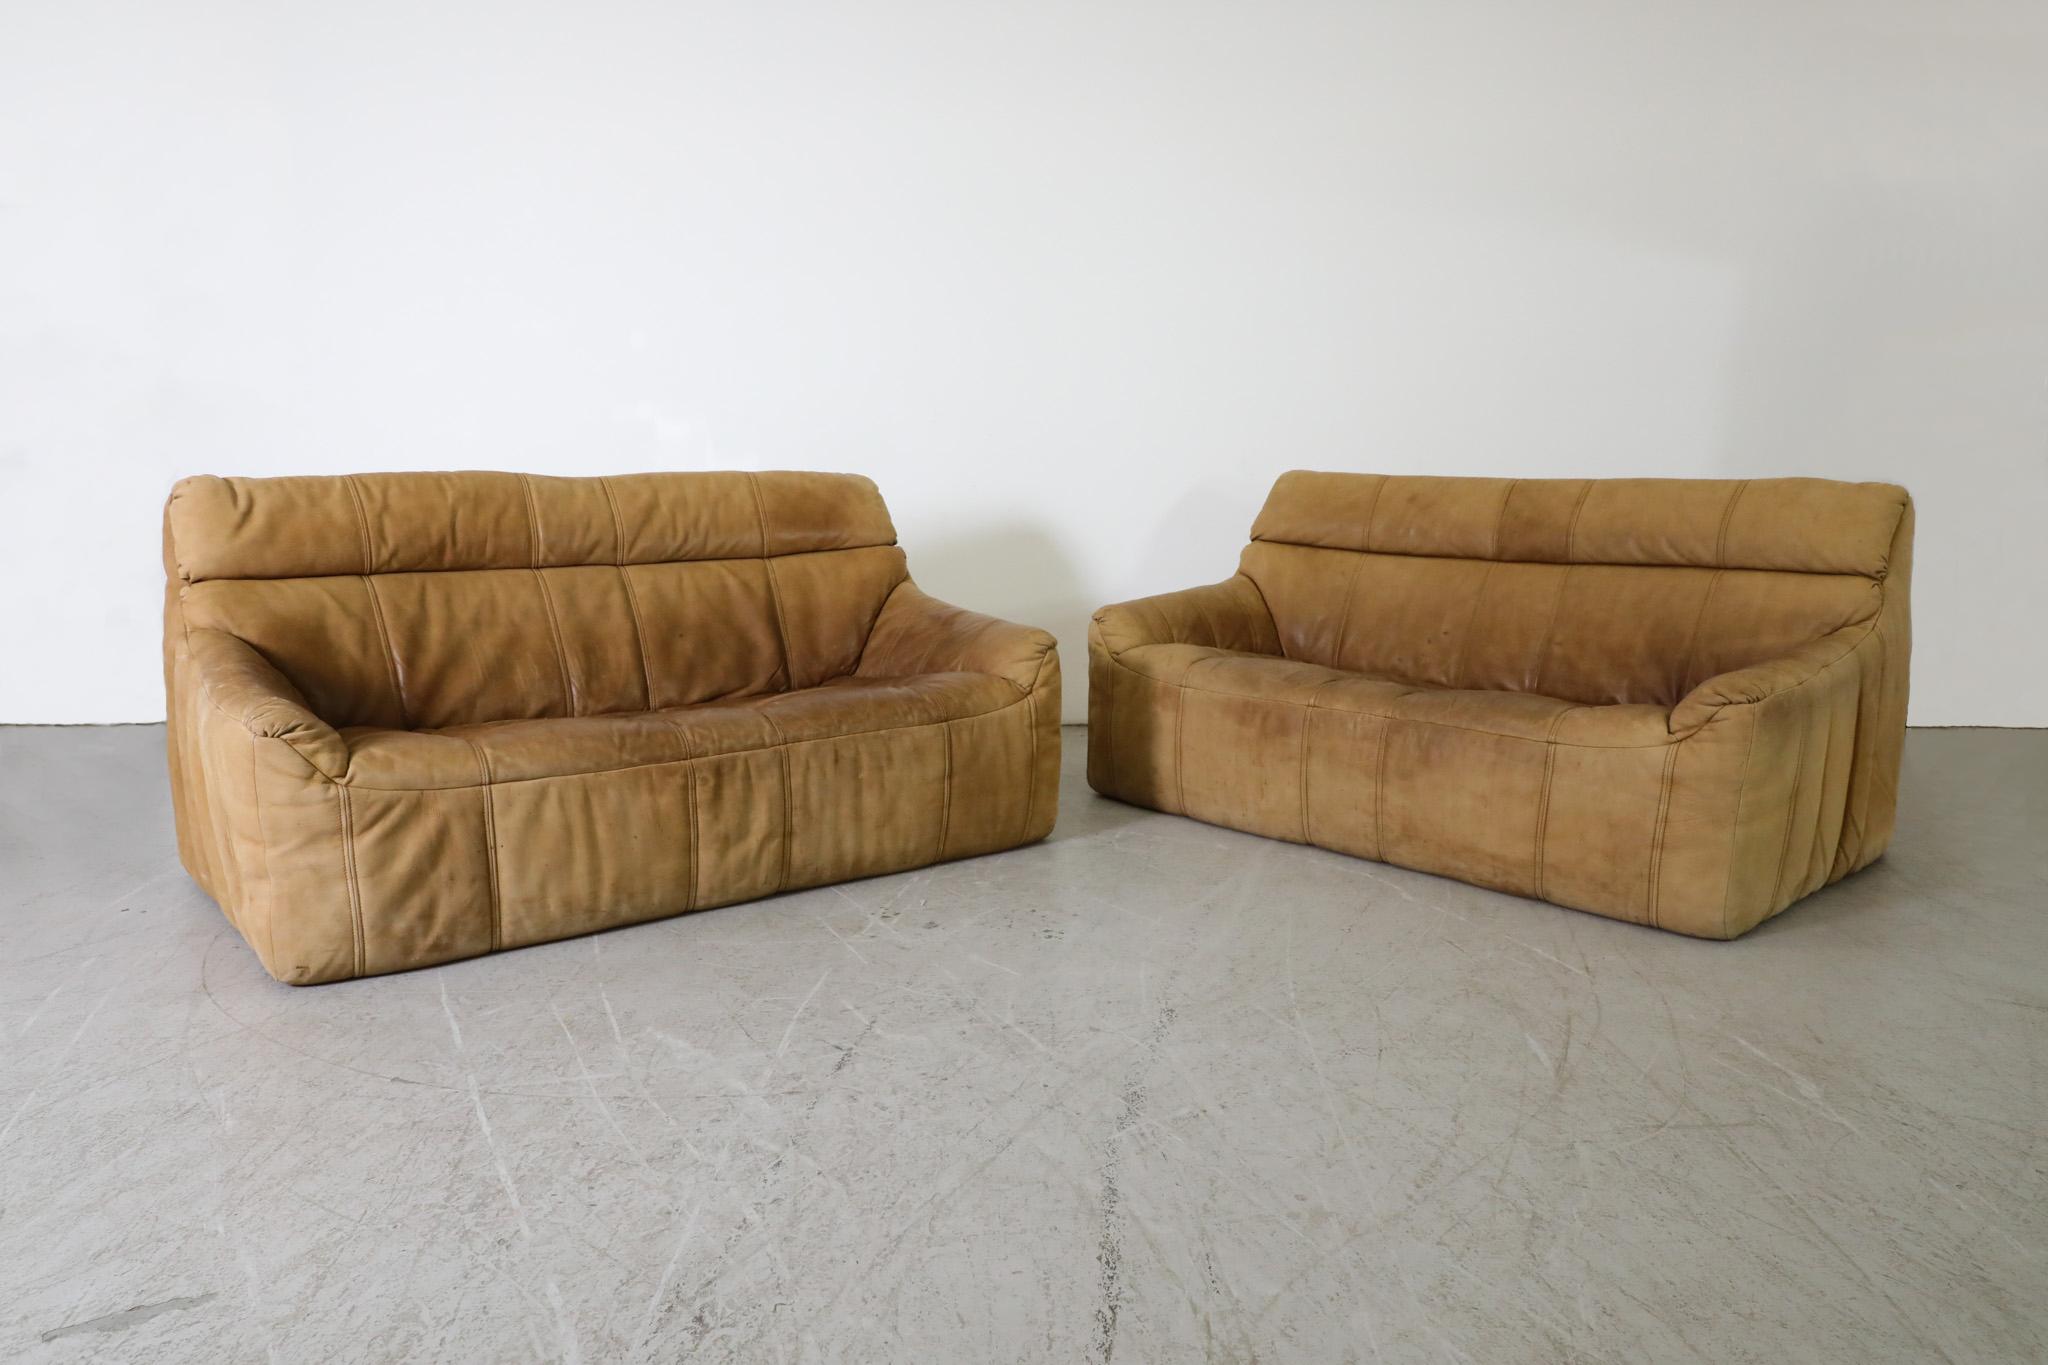 Mid-Century, nubuck leather sofas by German furniture manufacturer Rolf Benz. Designed and made in the 1970s. Handsomely designed with inviting soft form frames covered with durable, leather upholstery. Sofas have a beautiful, well-loved patina.